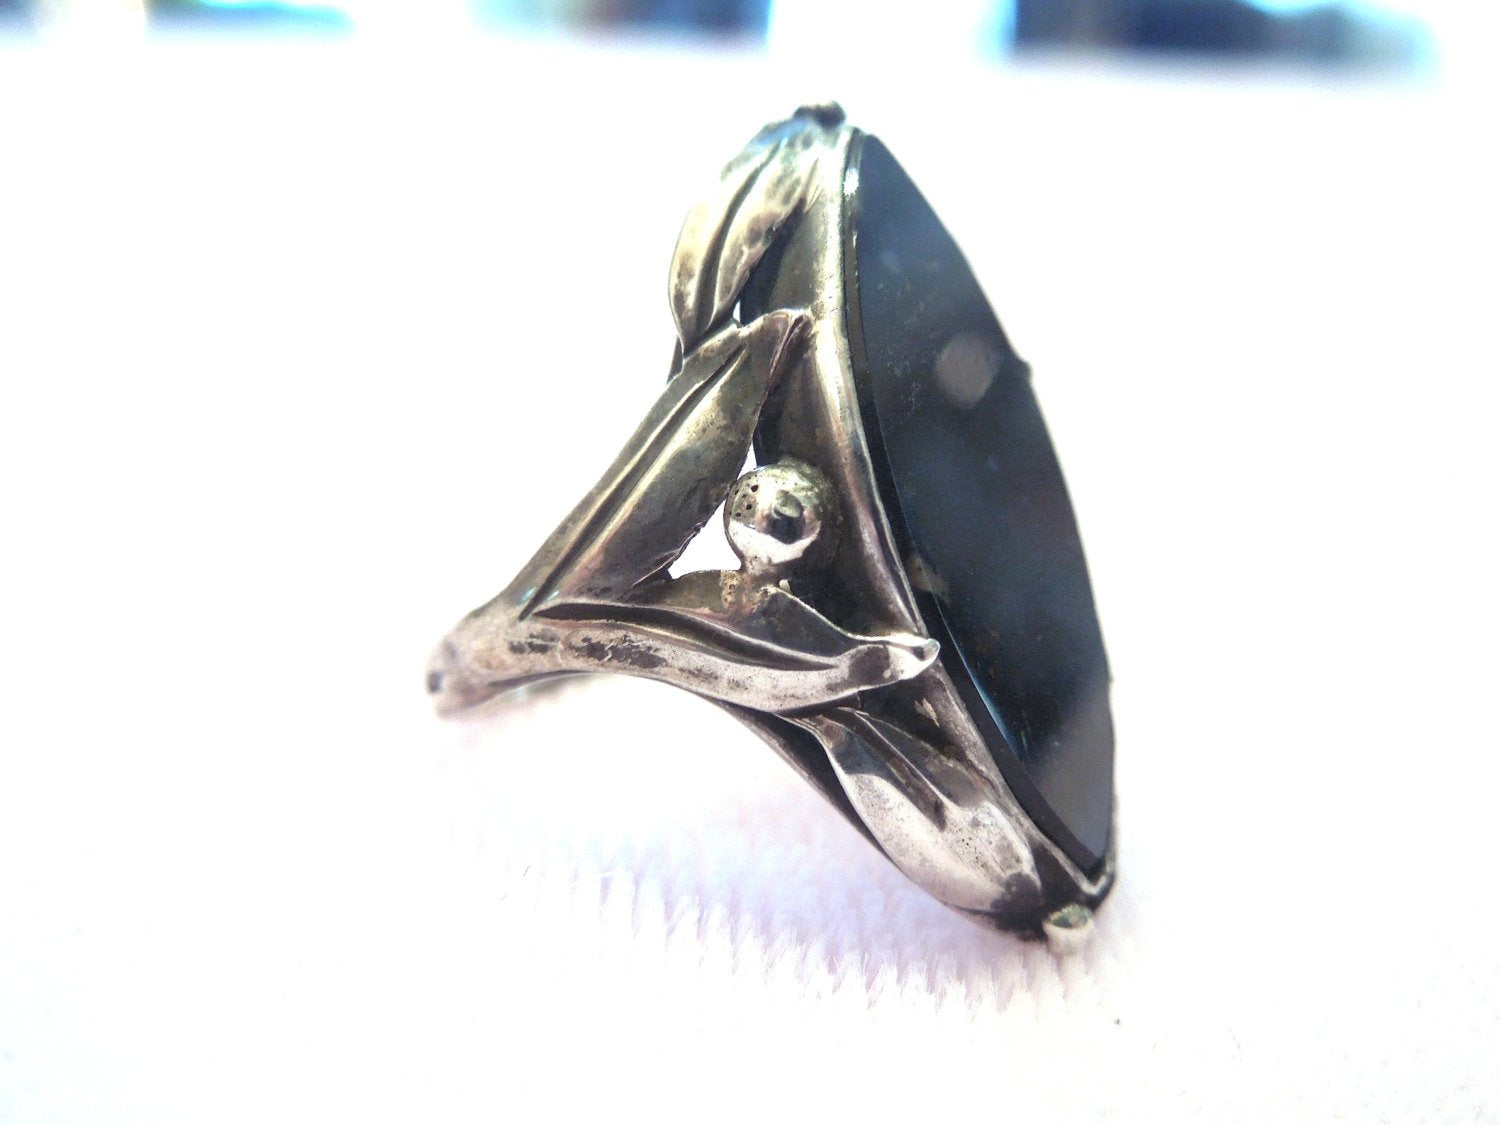 Marquise Cut Onyx and Sterling Silver Ring